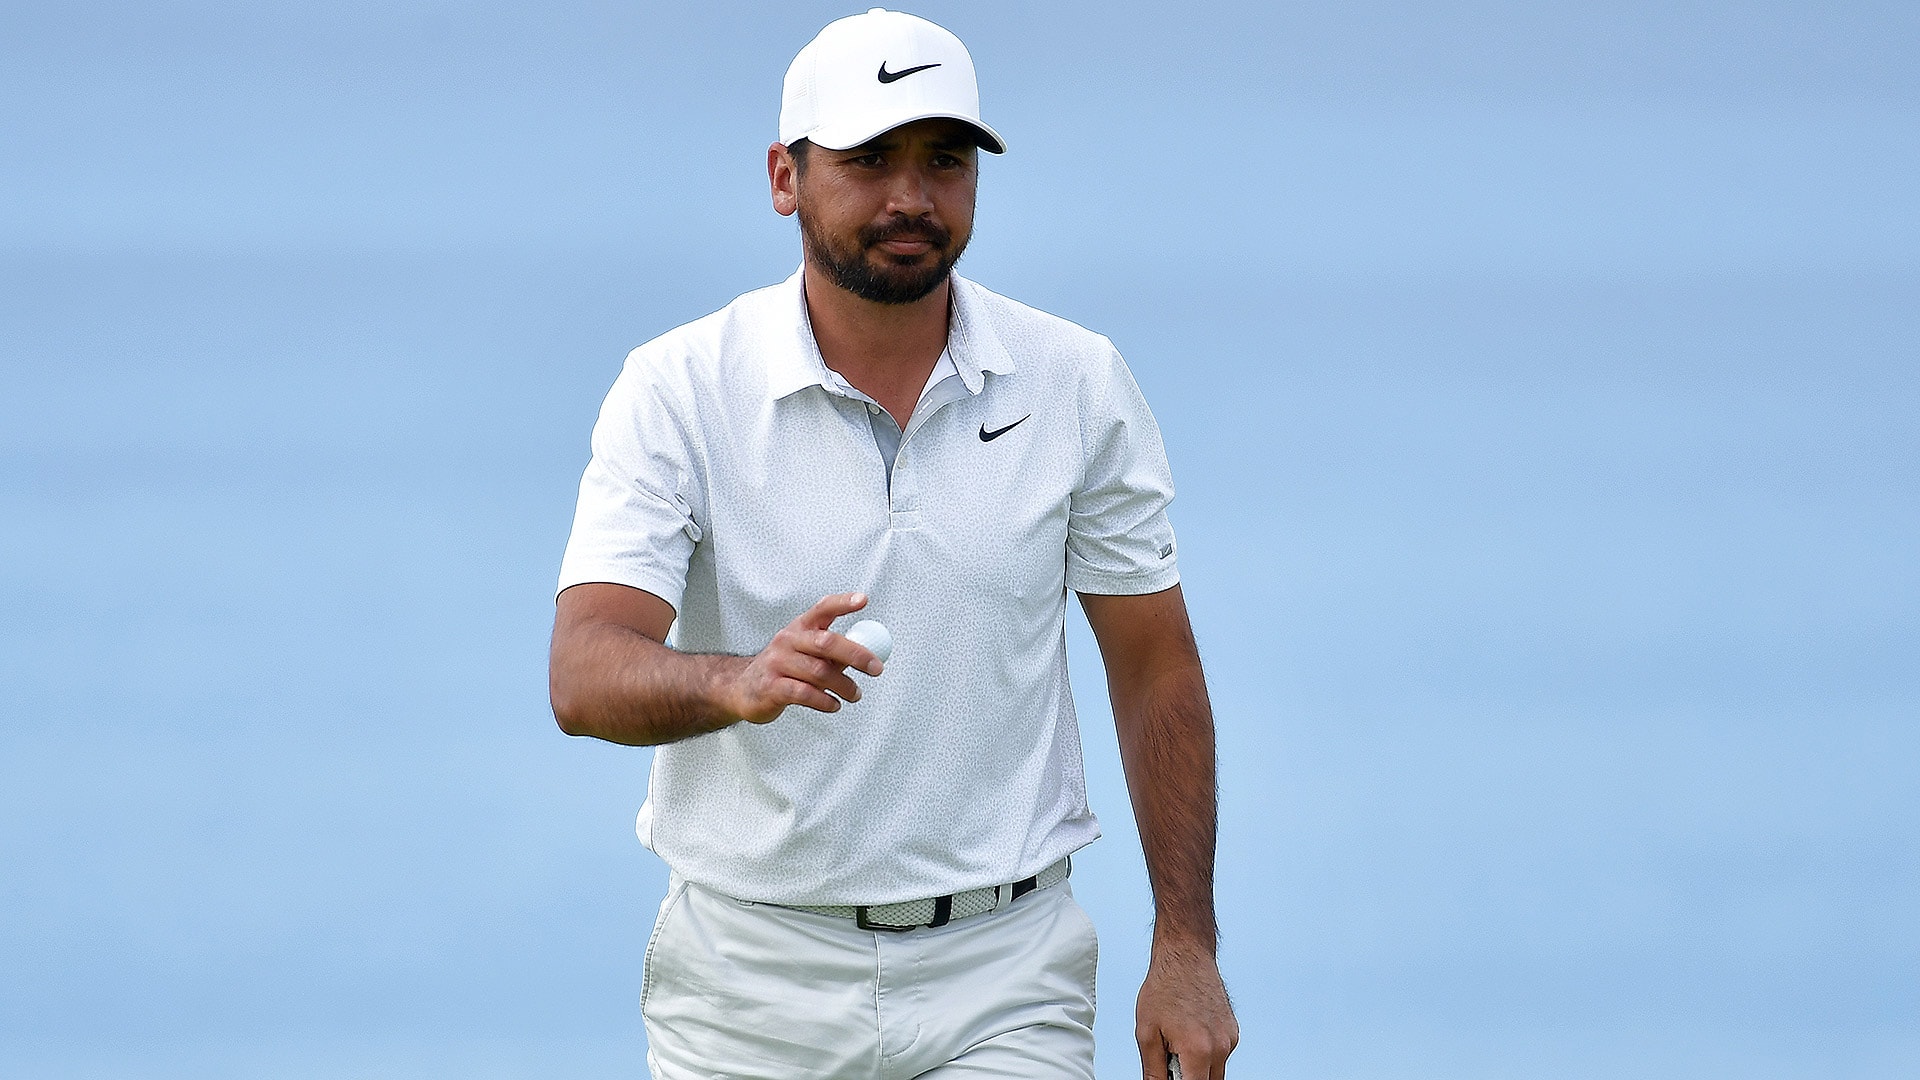 Jason Day within reach of unexpected victory, a third win at Torrey Pines 2